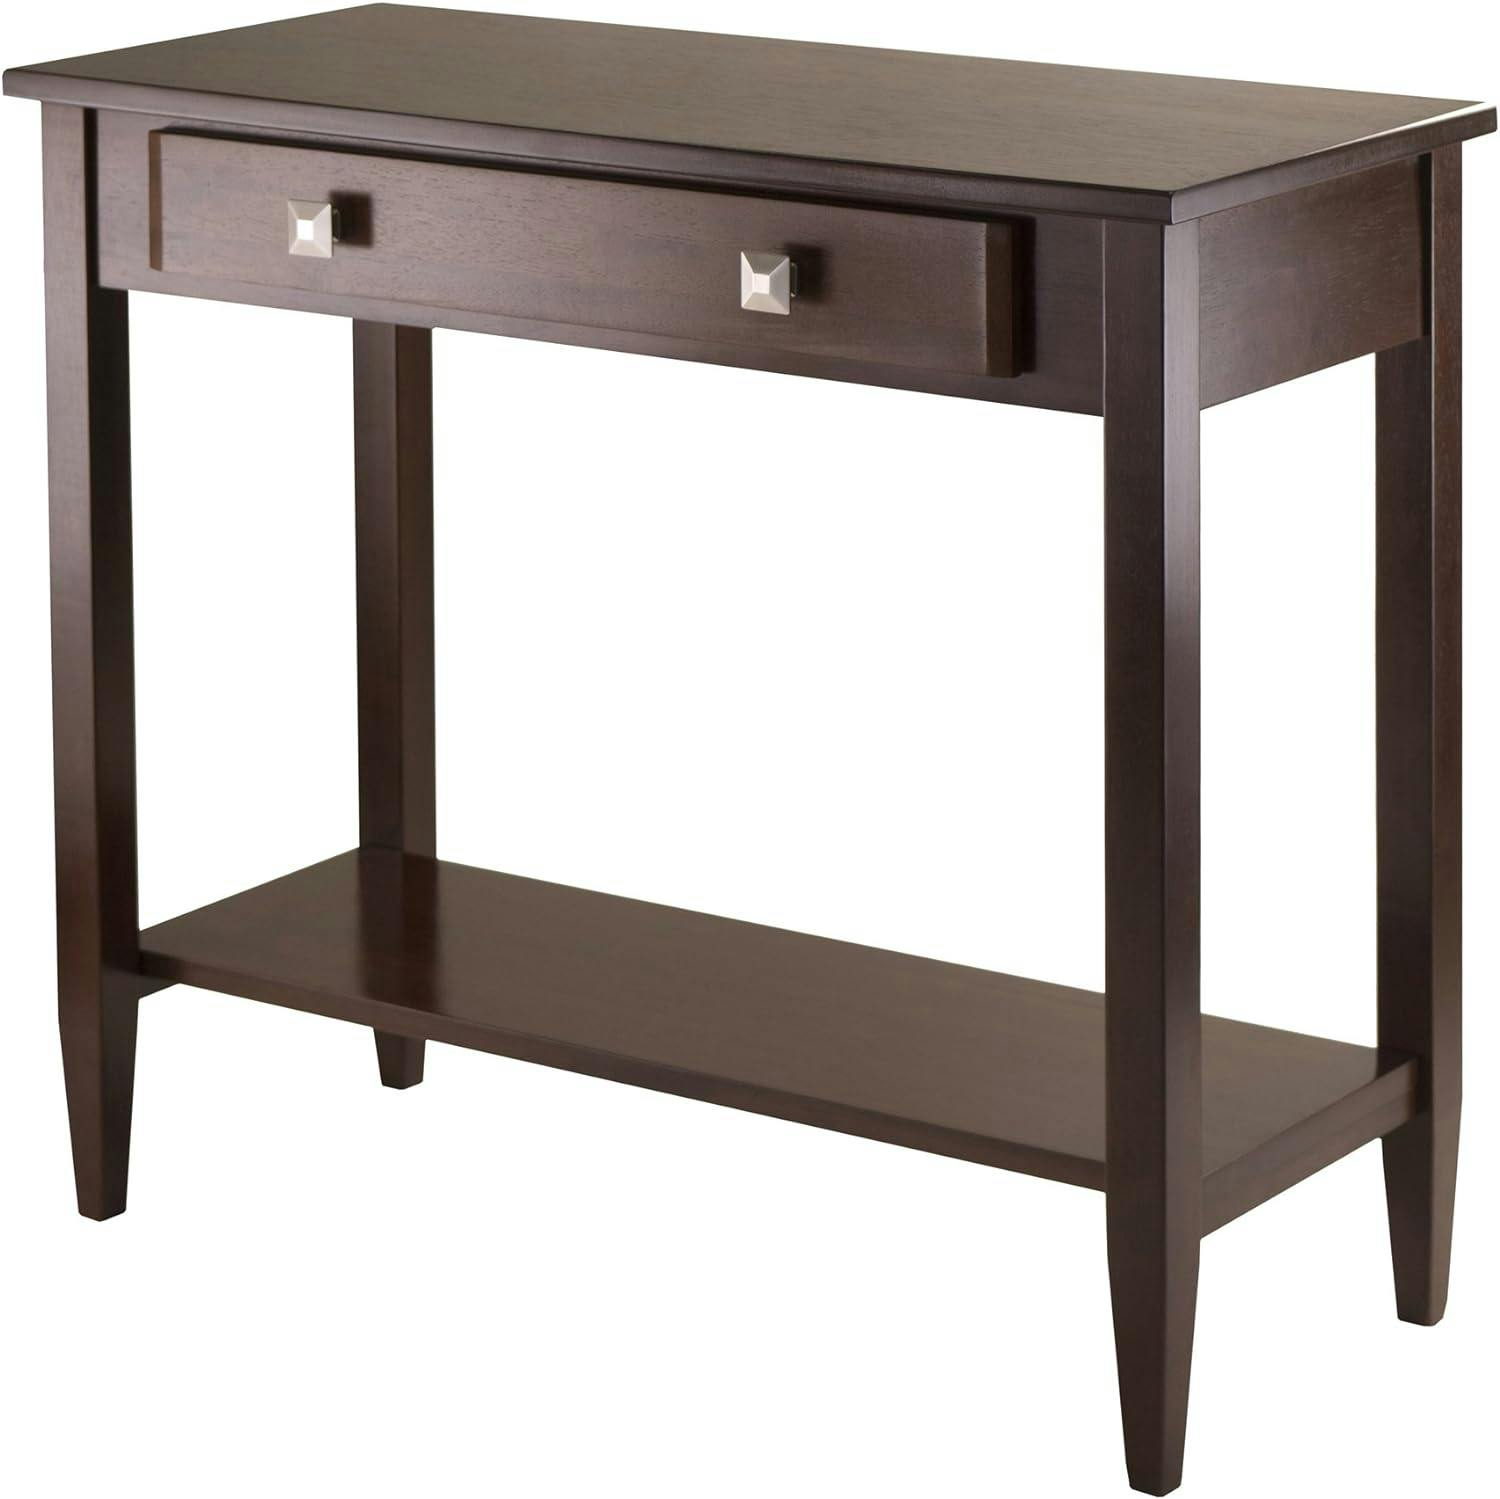 Winsome Richmond Mid-Century Modern Walnut Wood Console Table with Storage